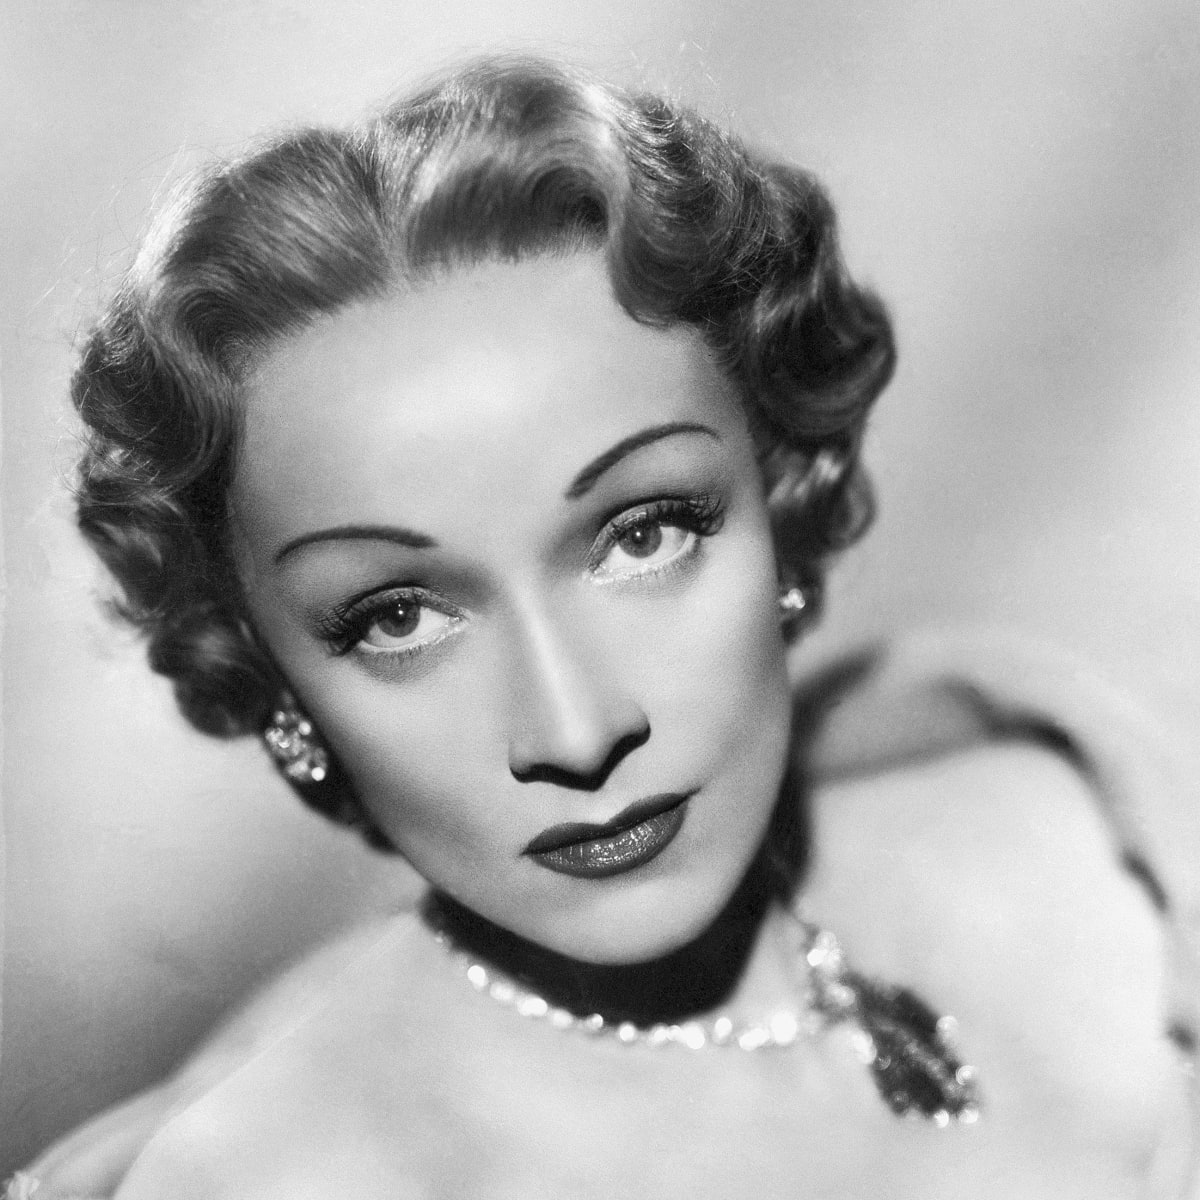 Artists from Berlin – Facts About Marlene Dietrich, Hollywood’s Femme Fatale – Part 1